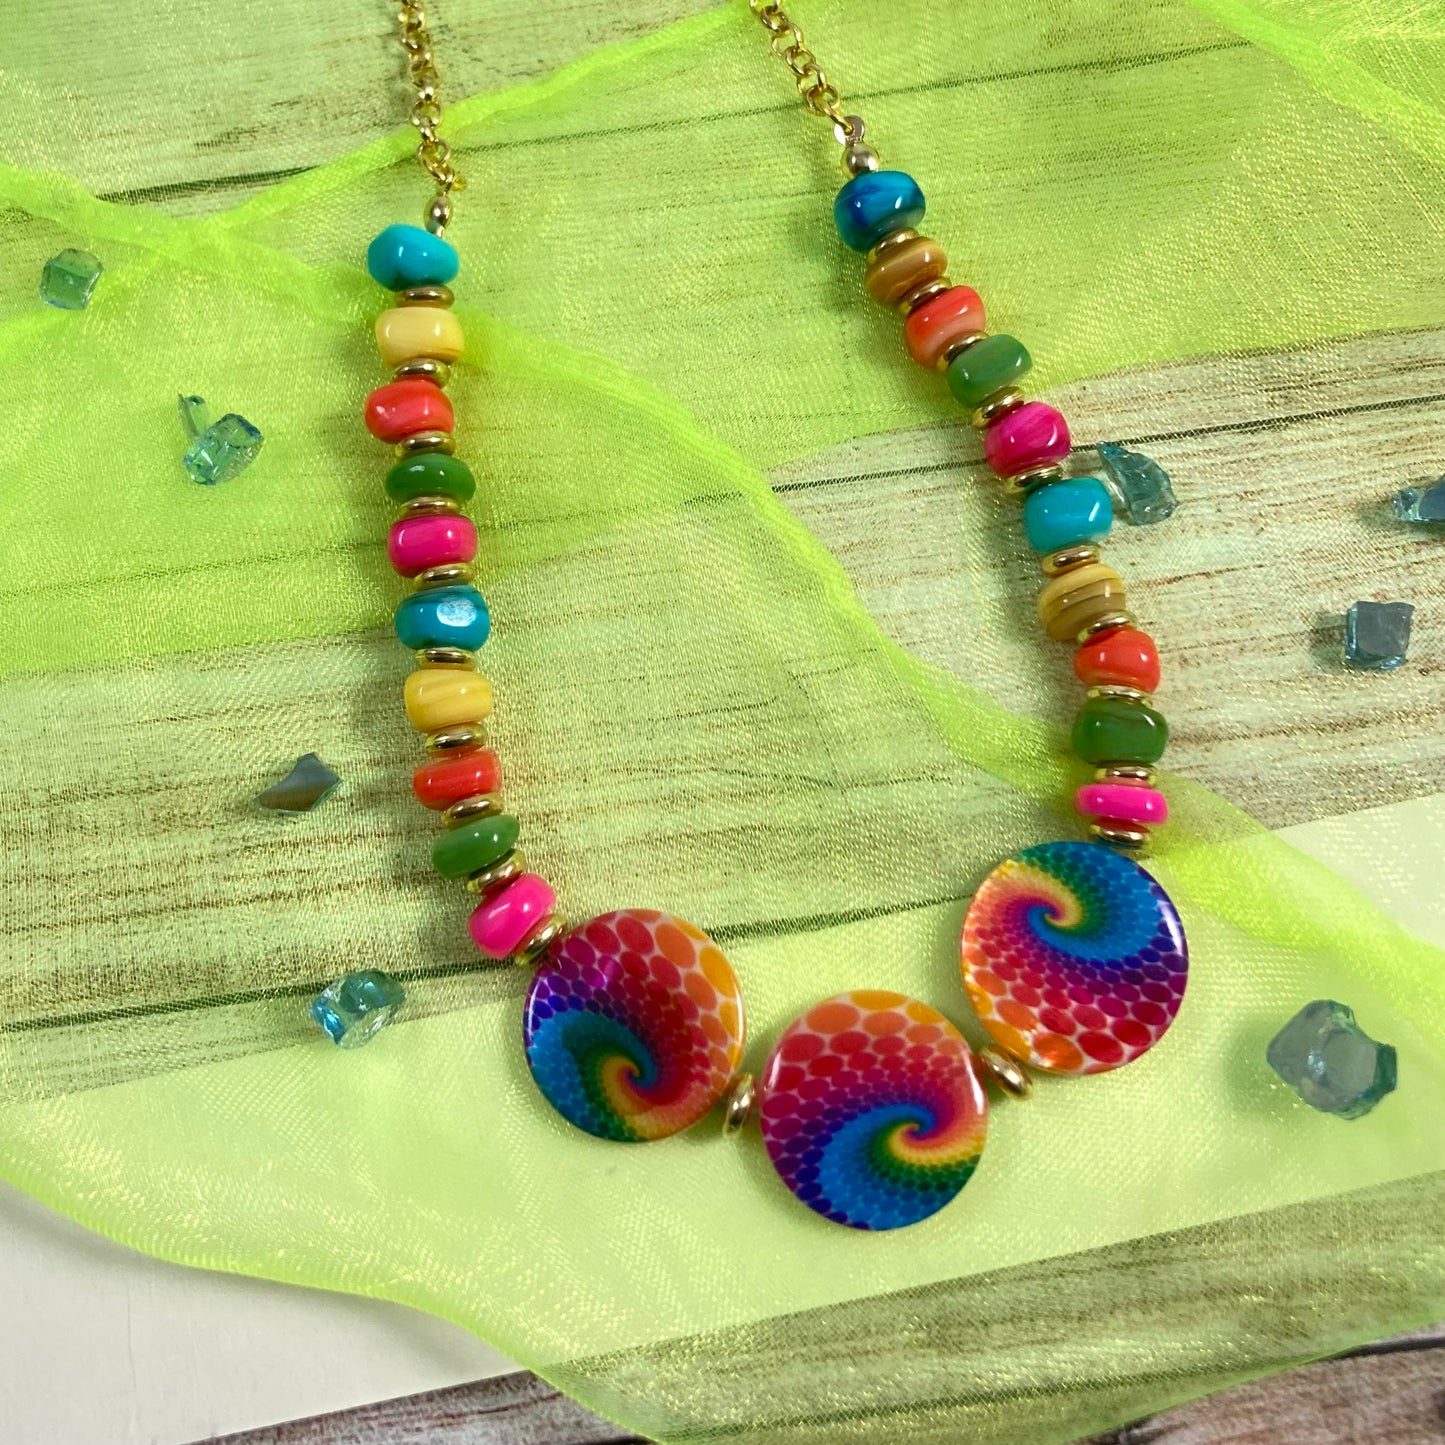 N24-C1 - Orange, Yellow, Green, Blue & Gold Necklace with Multi-Colored Disc Focal